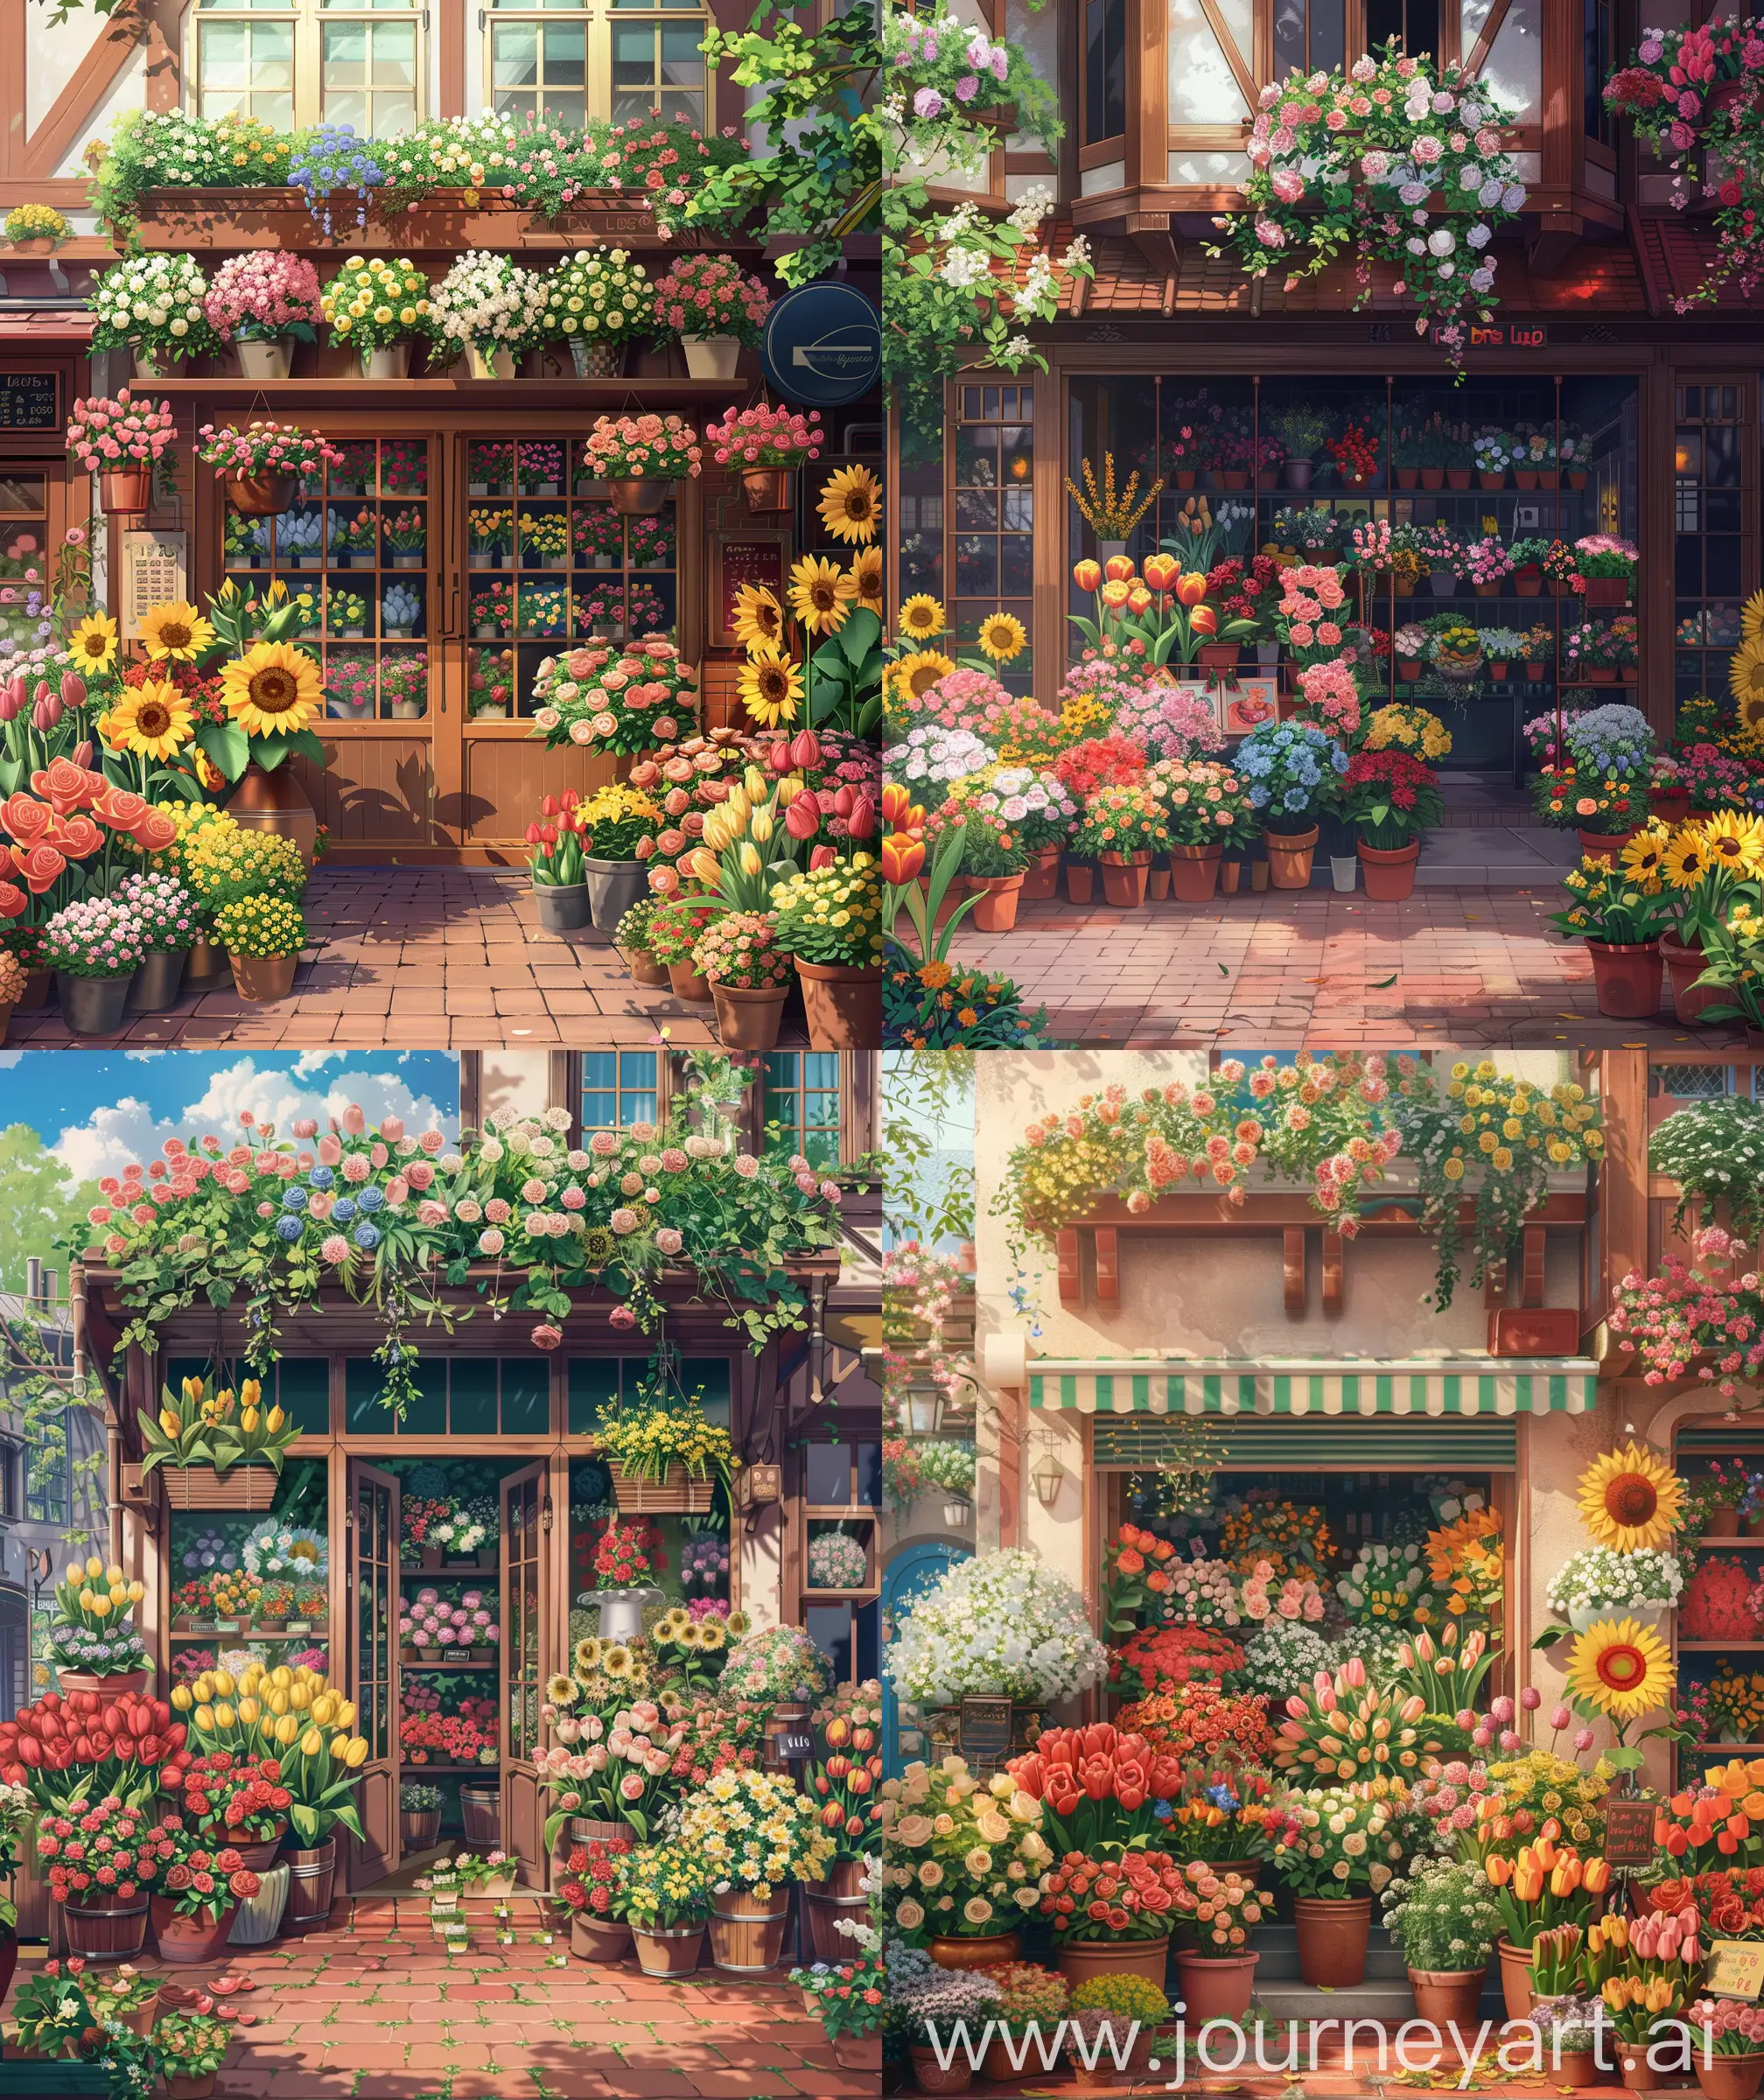 Anime-Flower-Shop-Illustration-Vintage-Style-Front-Facade-Displaying-Rose-Tulip-and-Sunflower